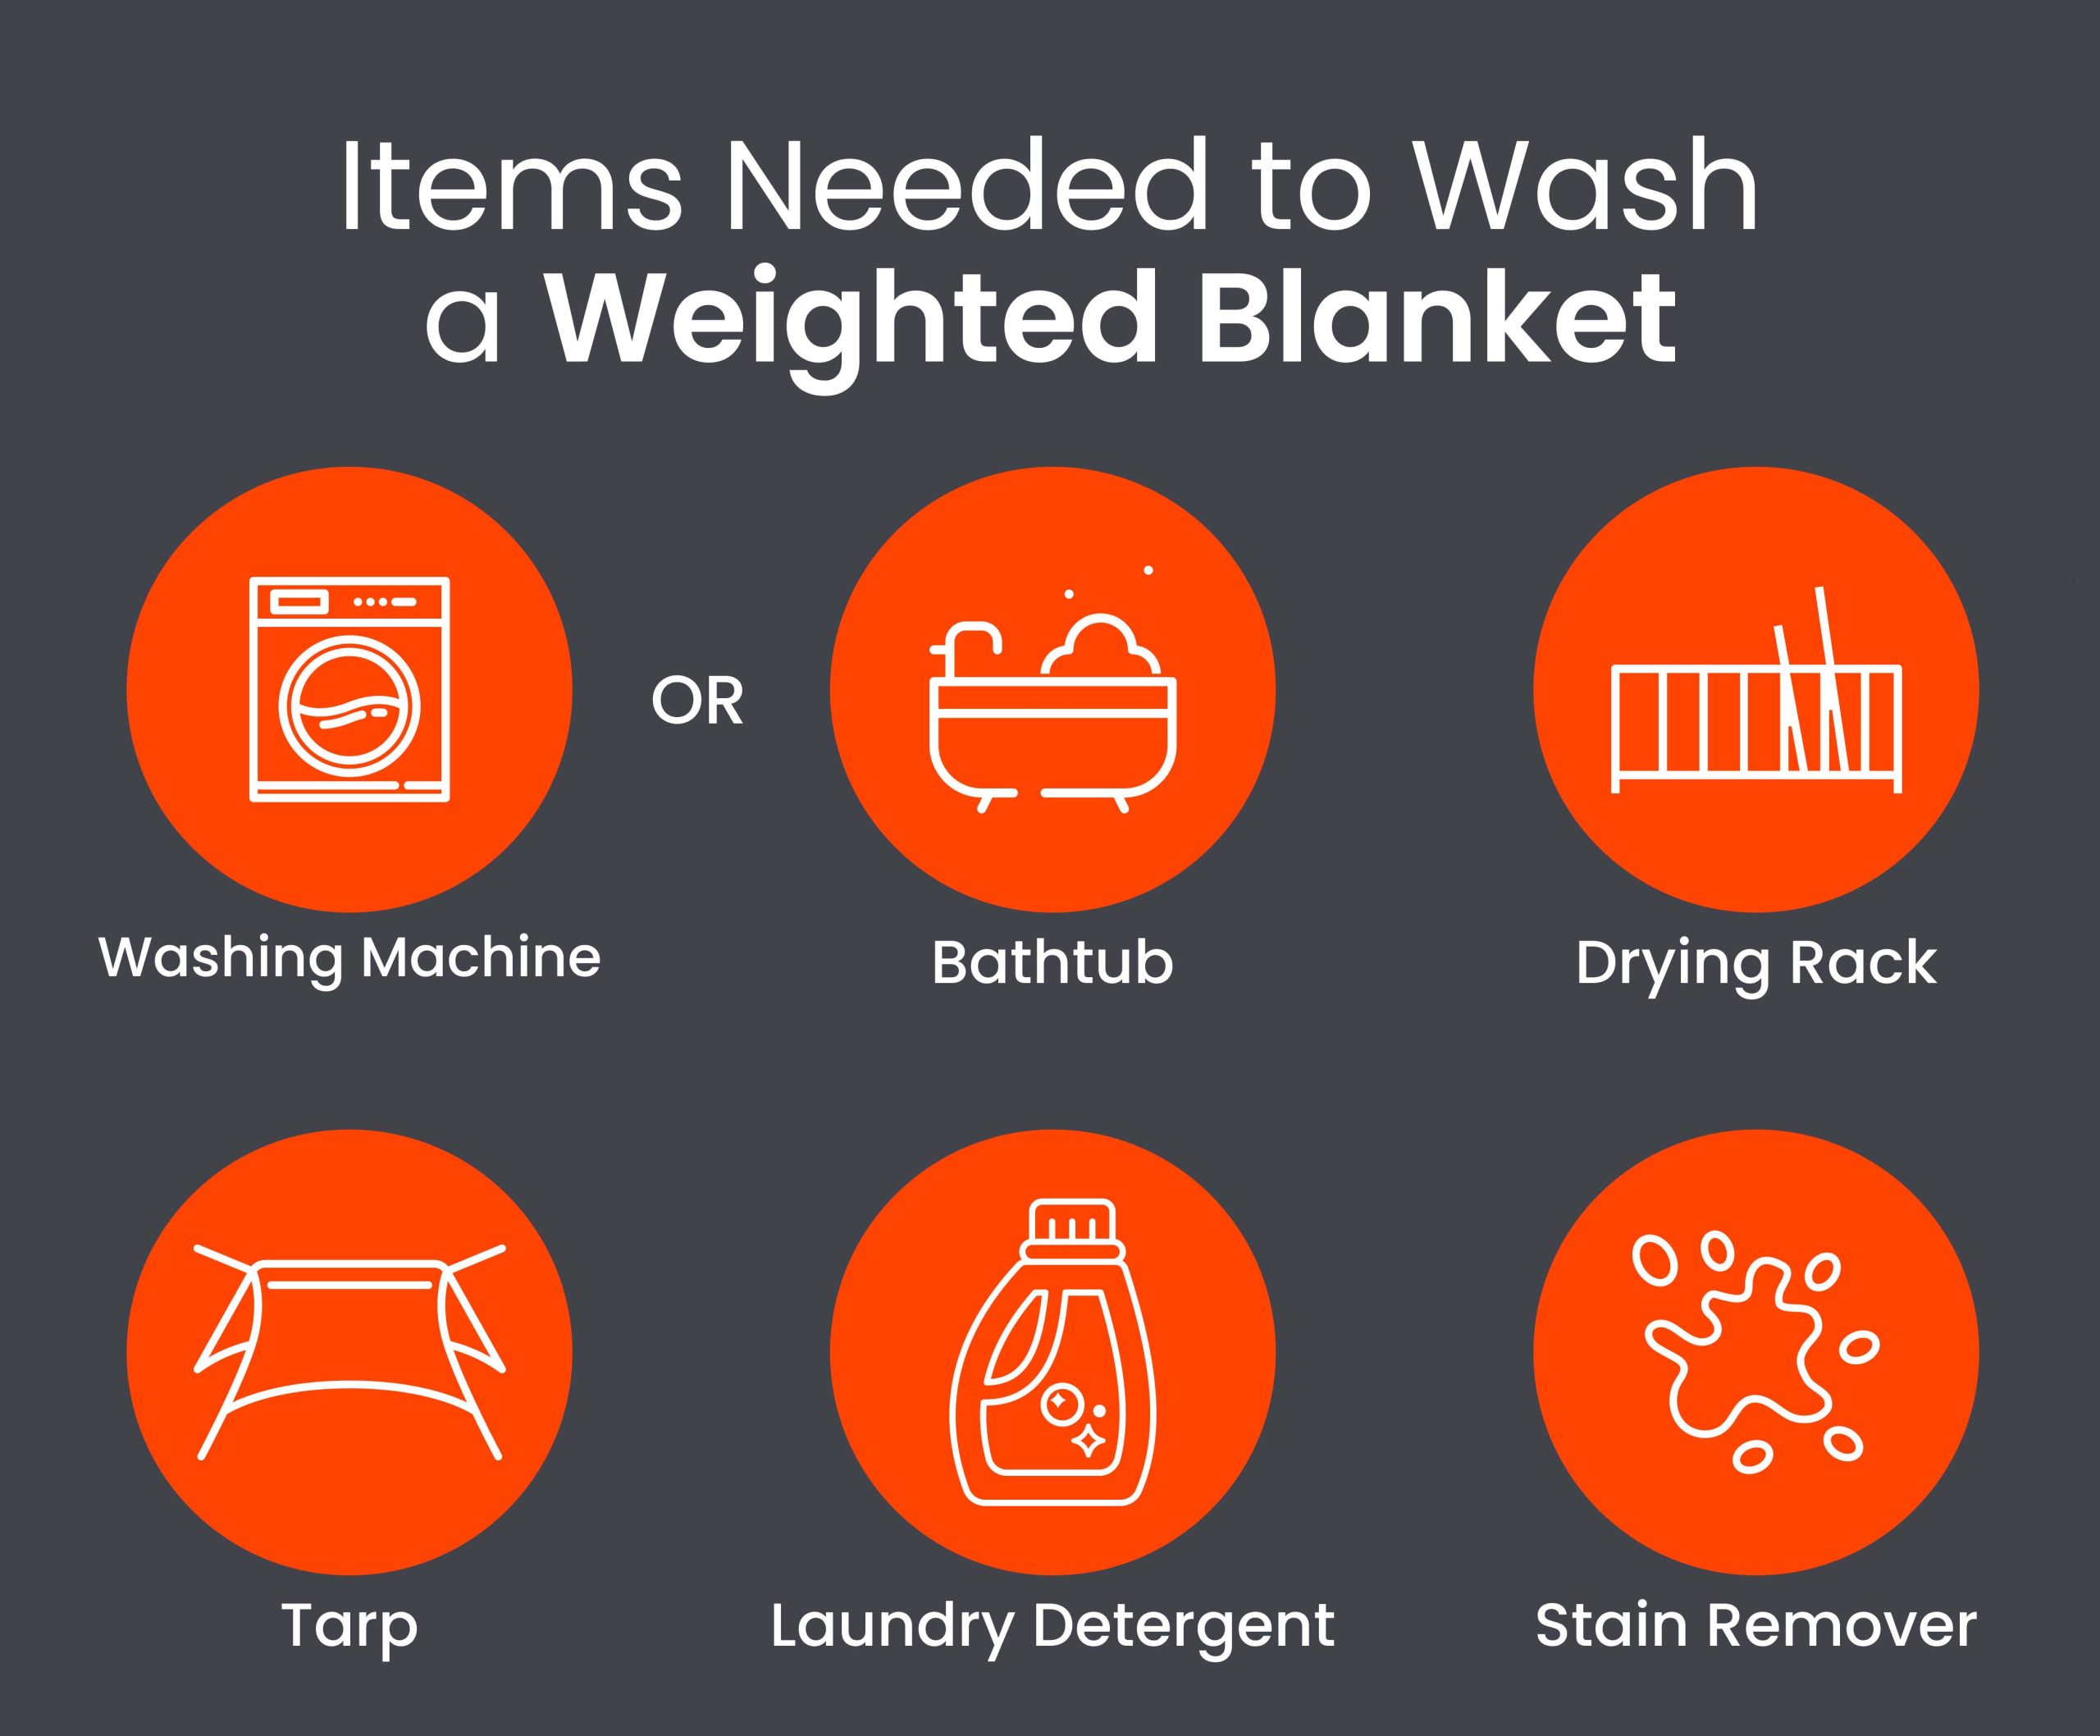 Items needed to wash a weighted blanket